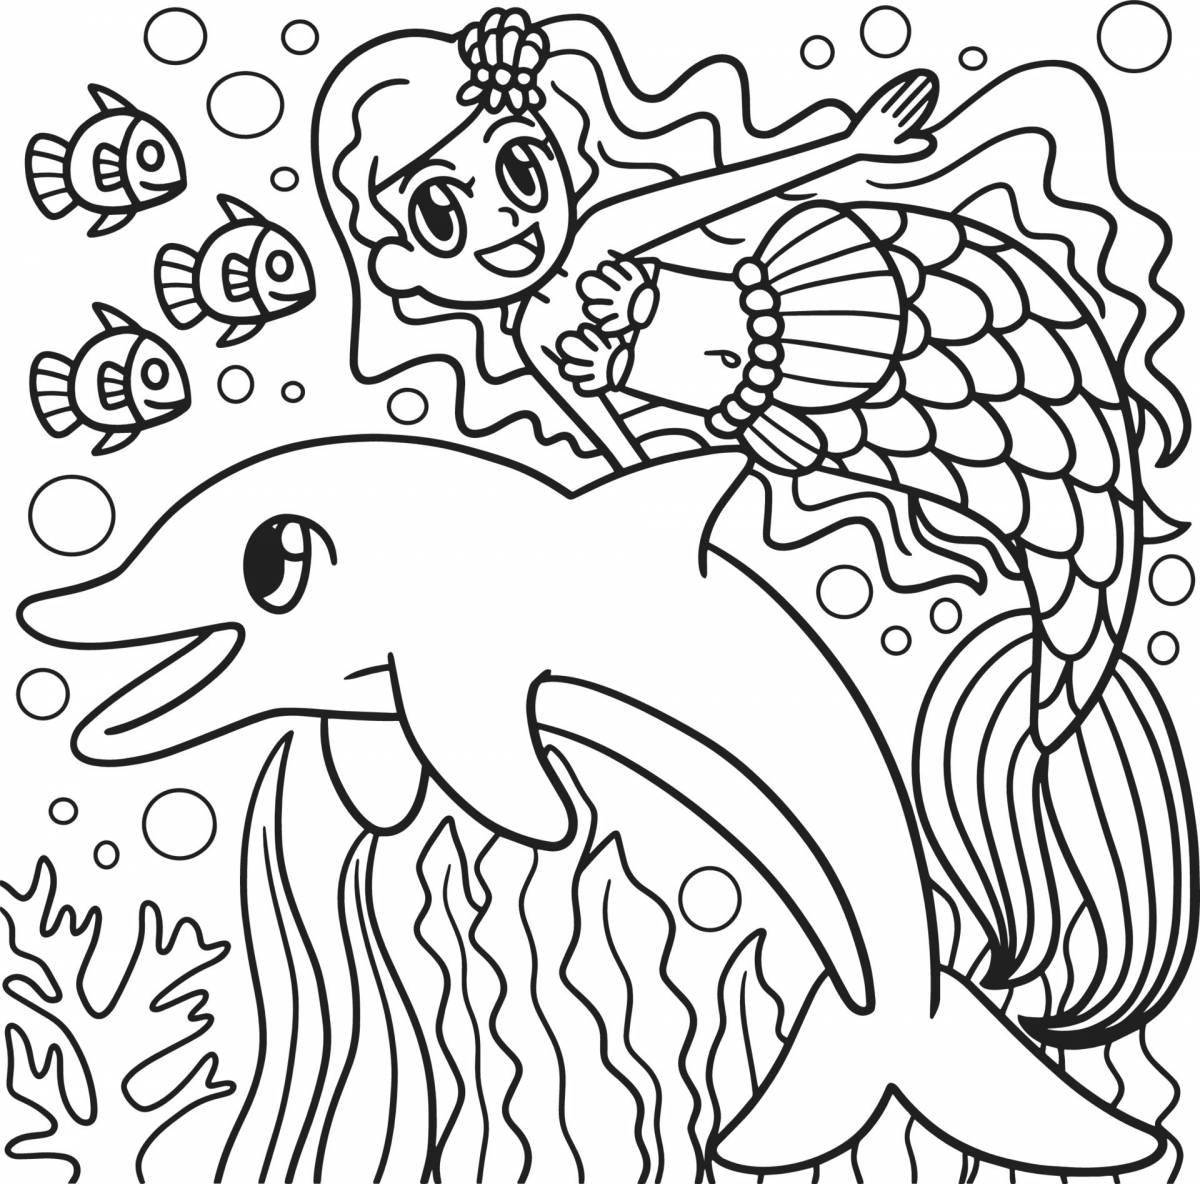 Peaceful coloring mermaid and dolphin